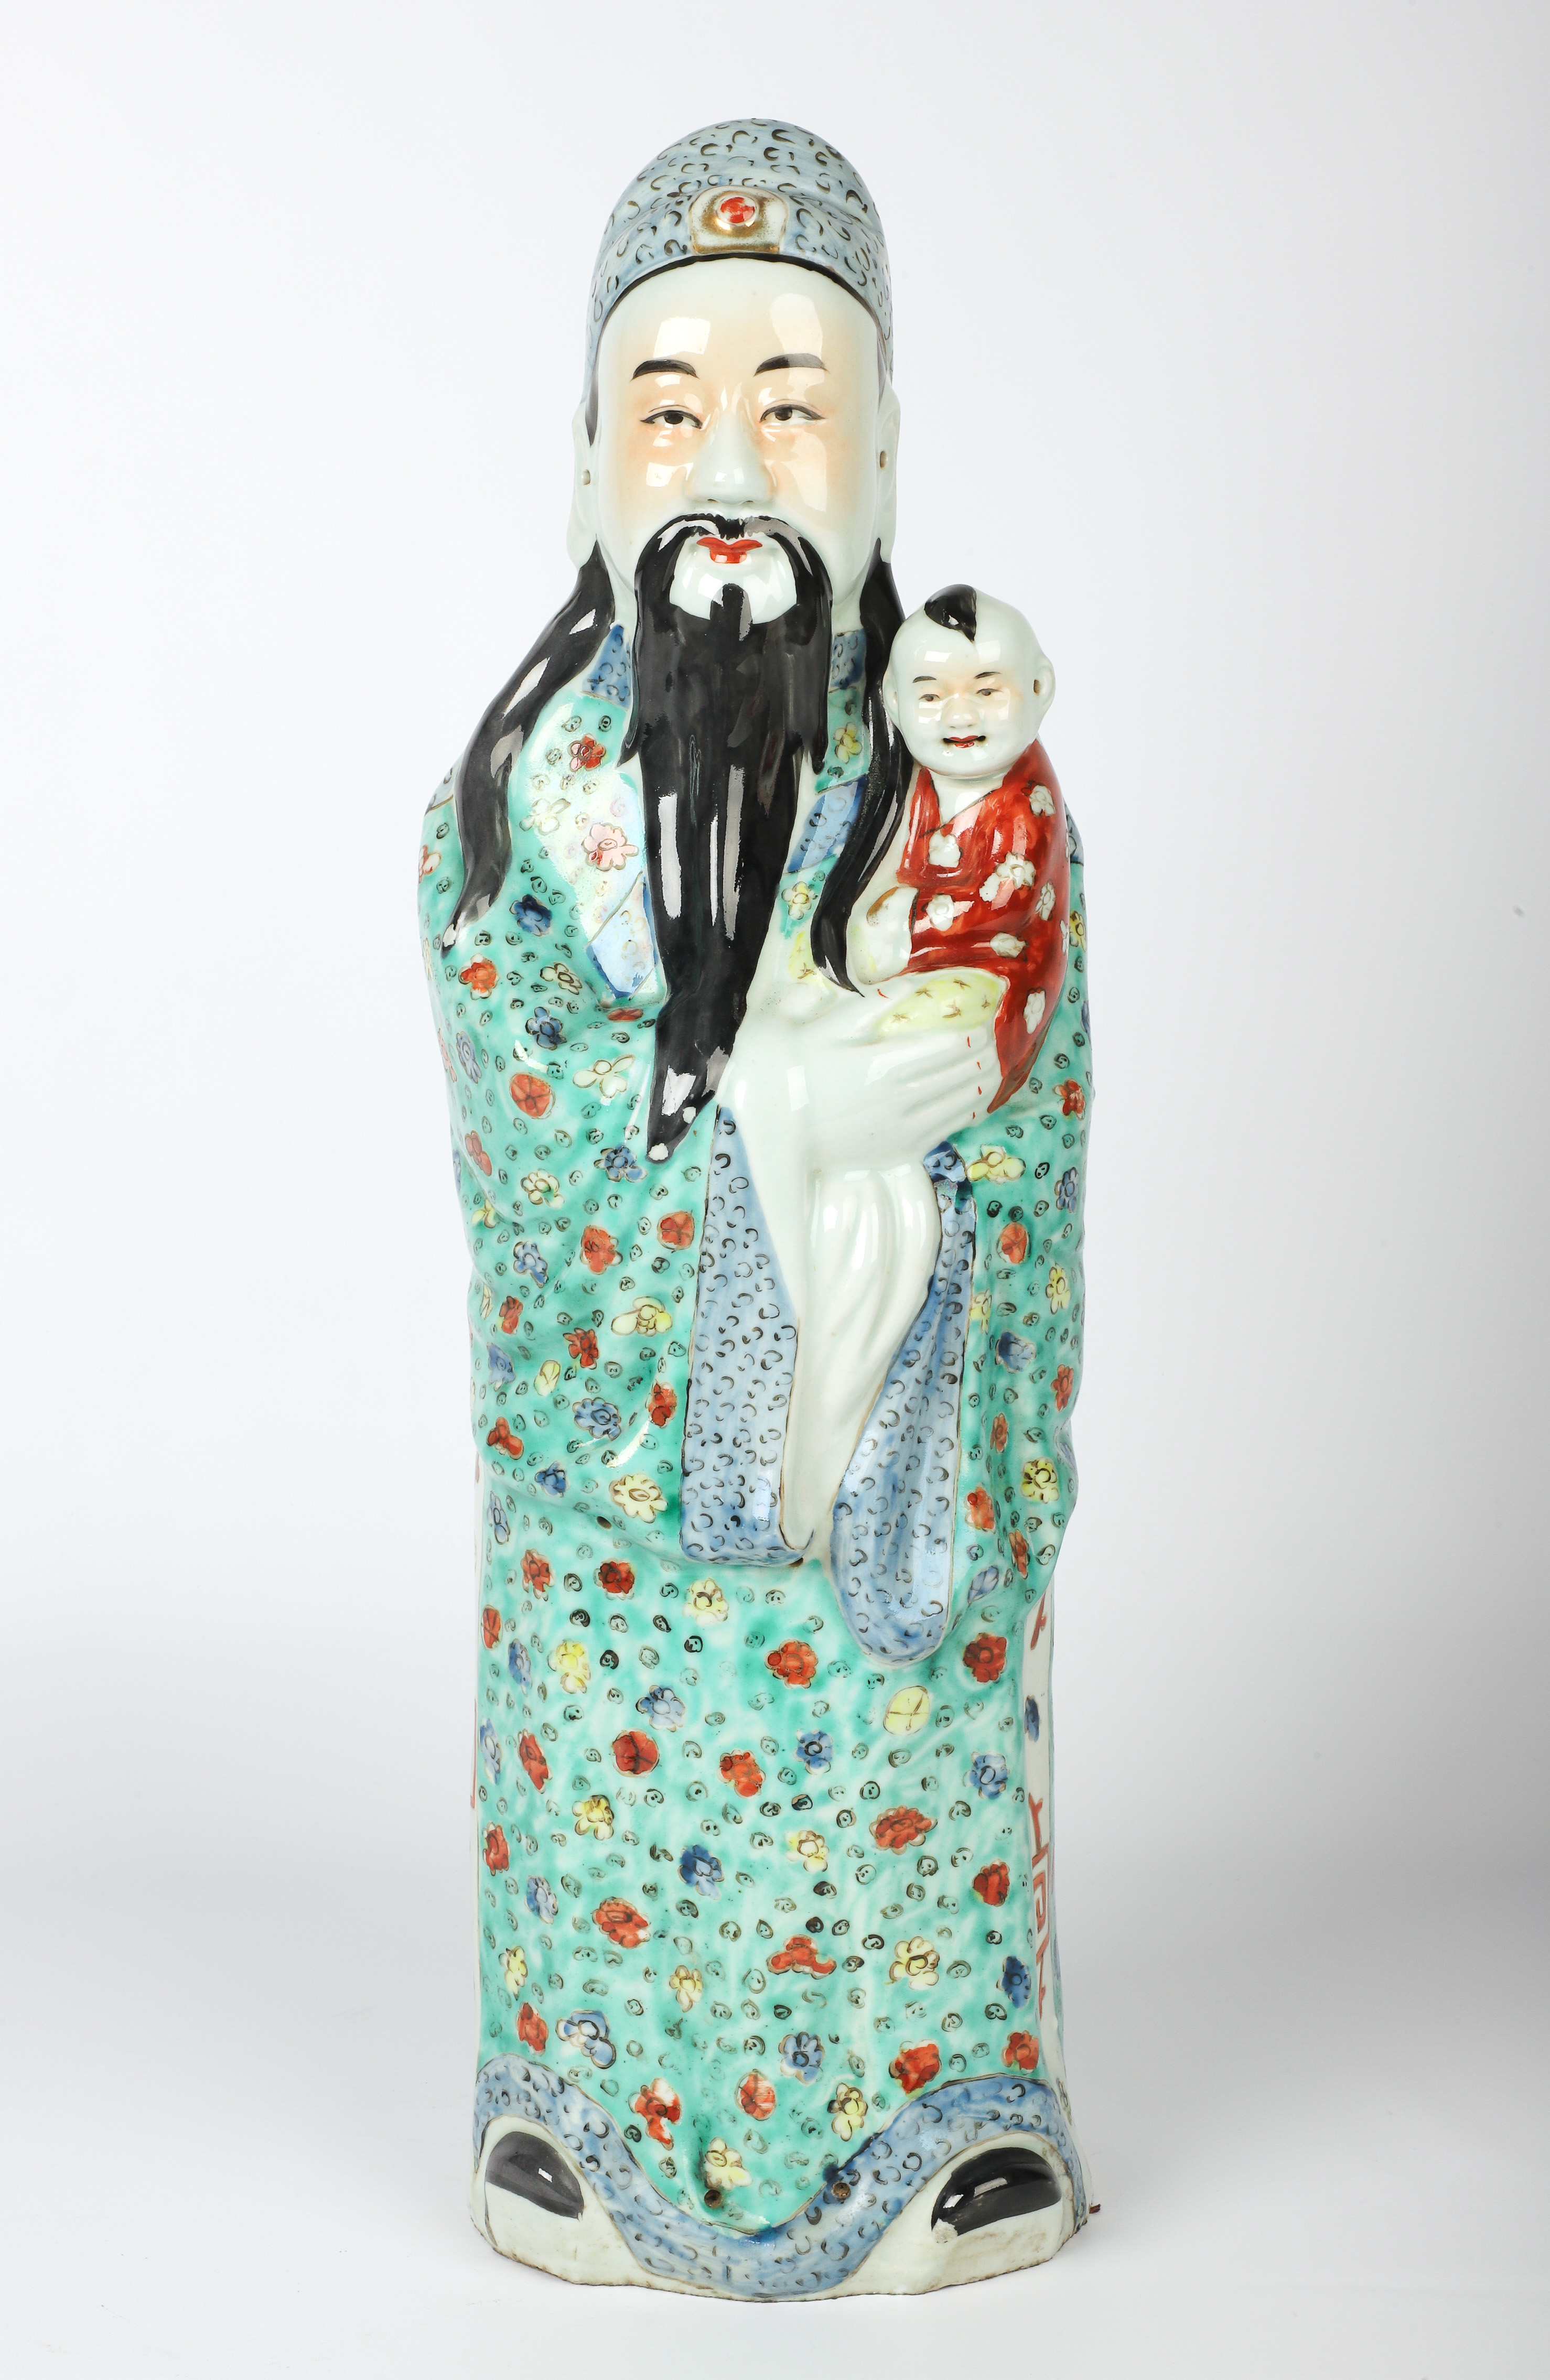 Large Chinese porcelain figure  3b15fd